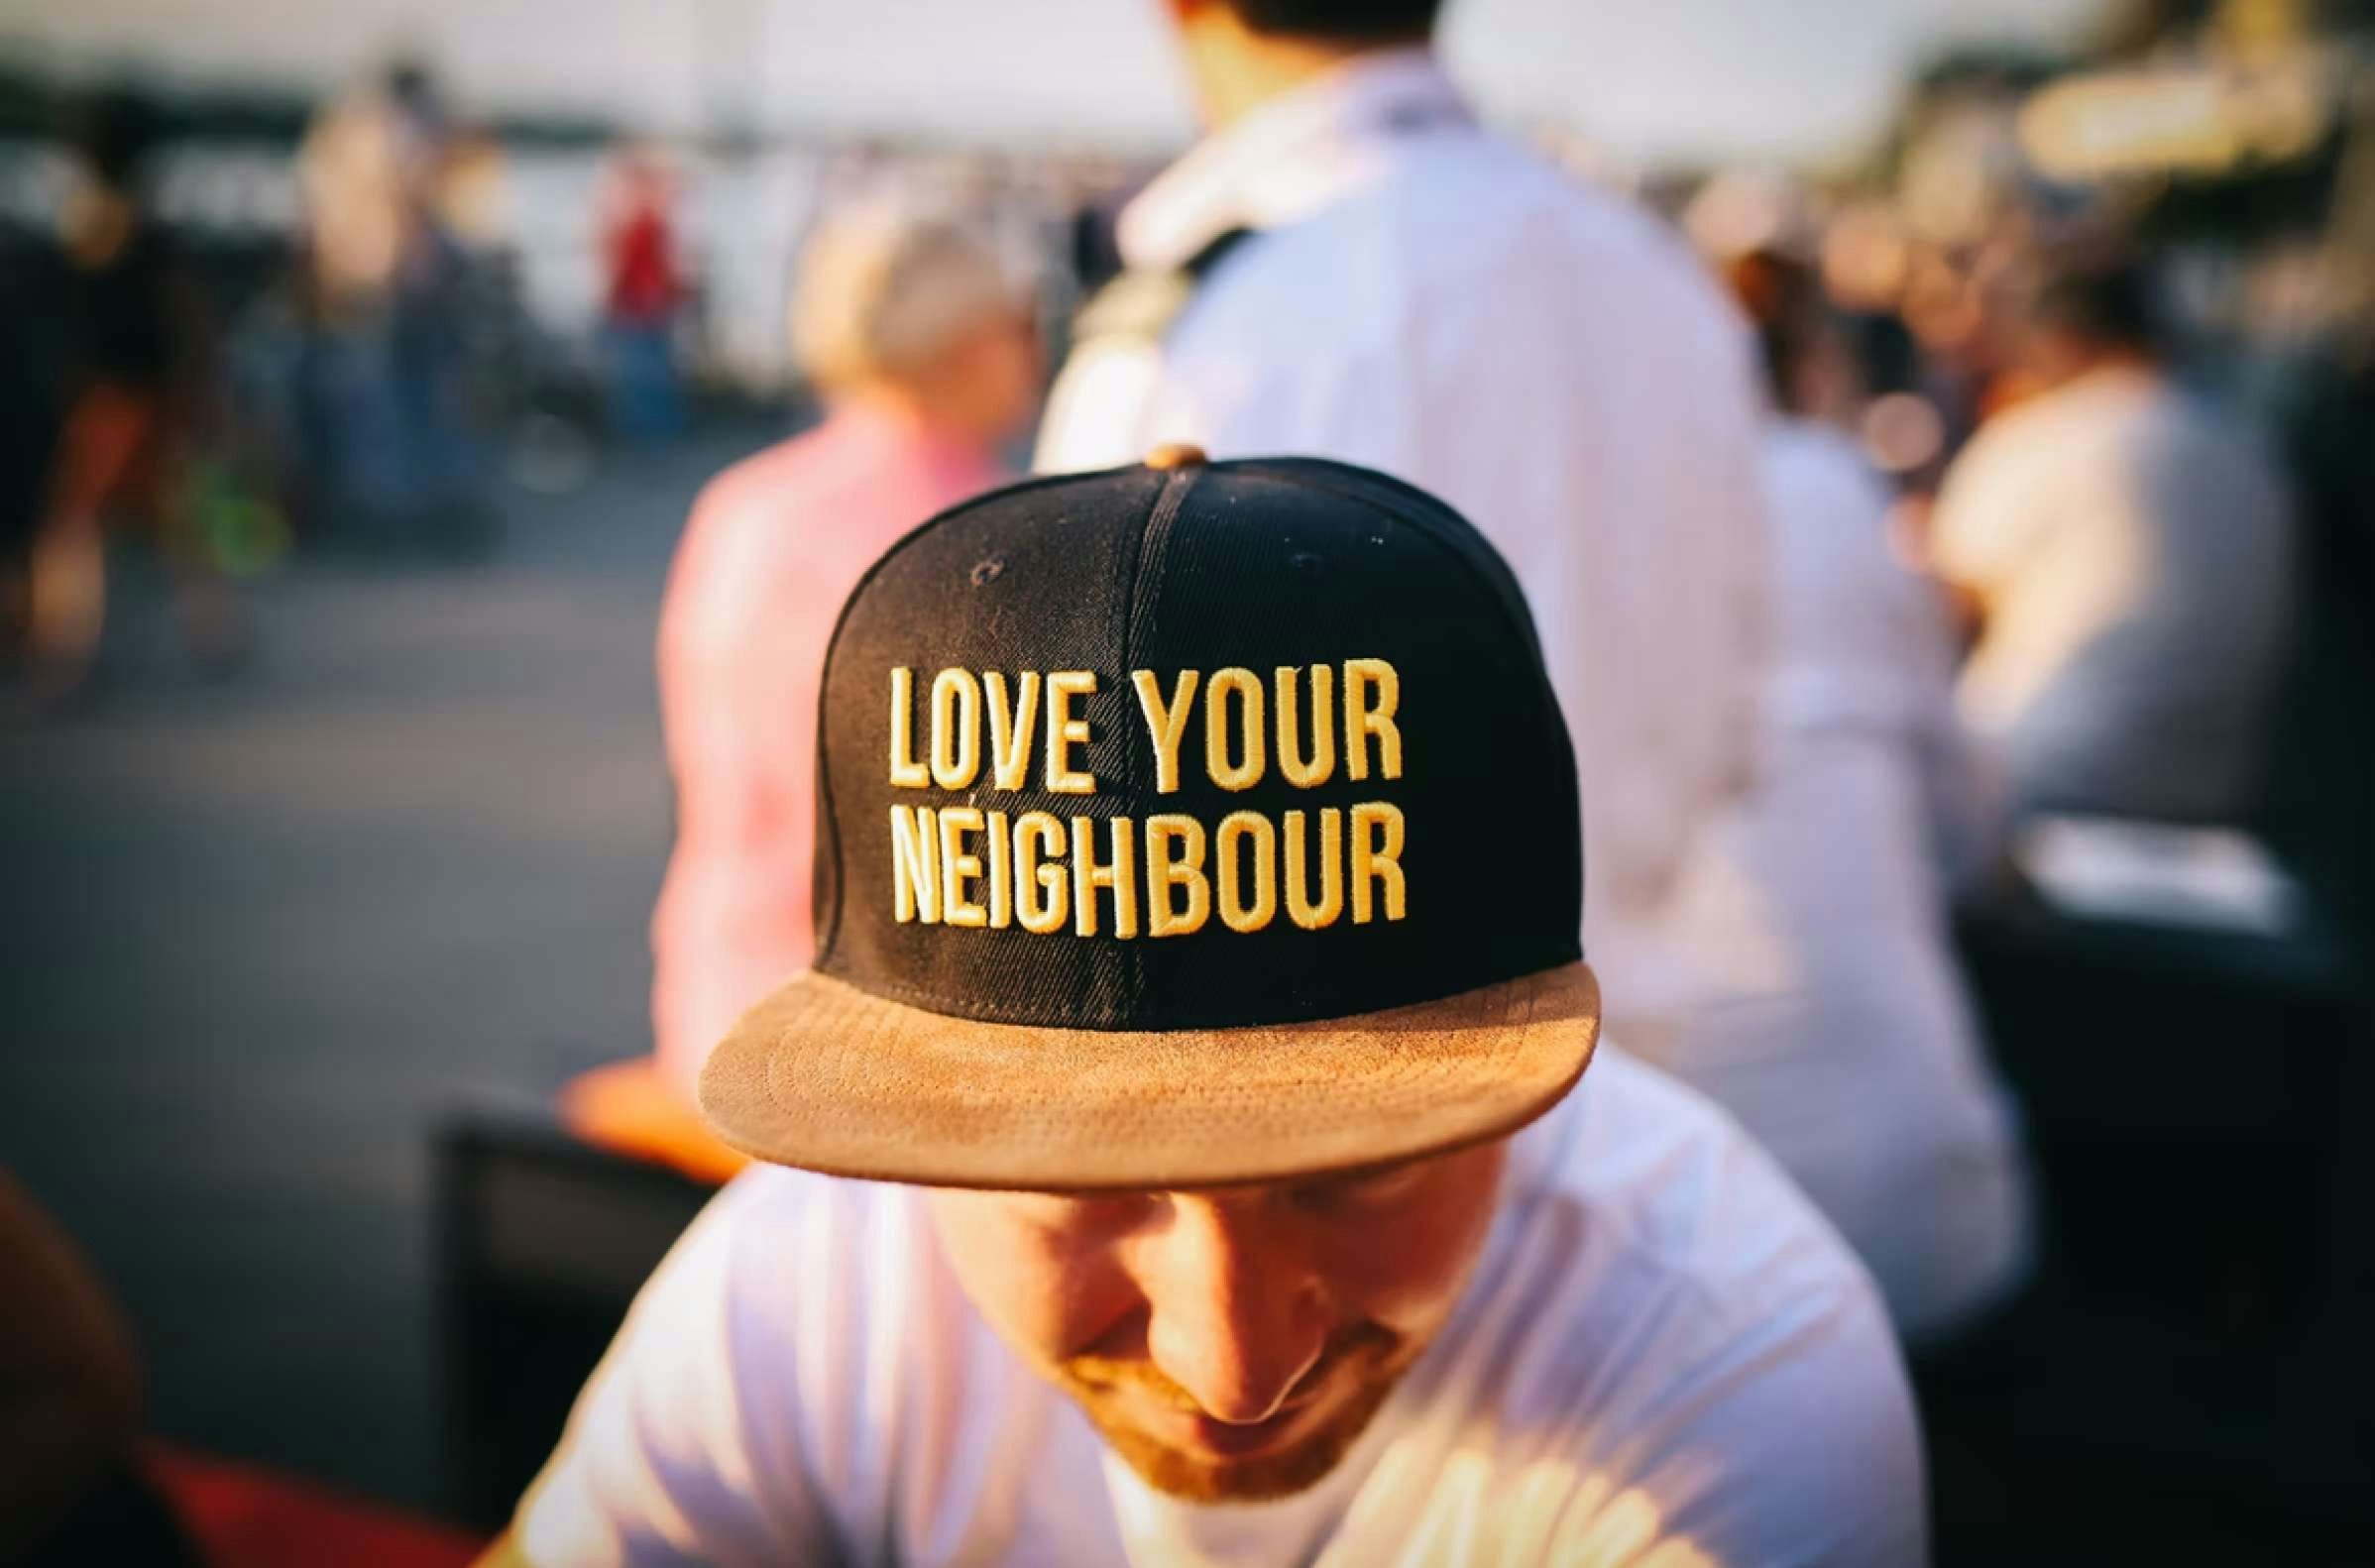 Man wearing black hat with yellow letters that say, "Love Your Neighbor"